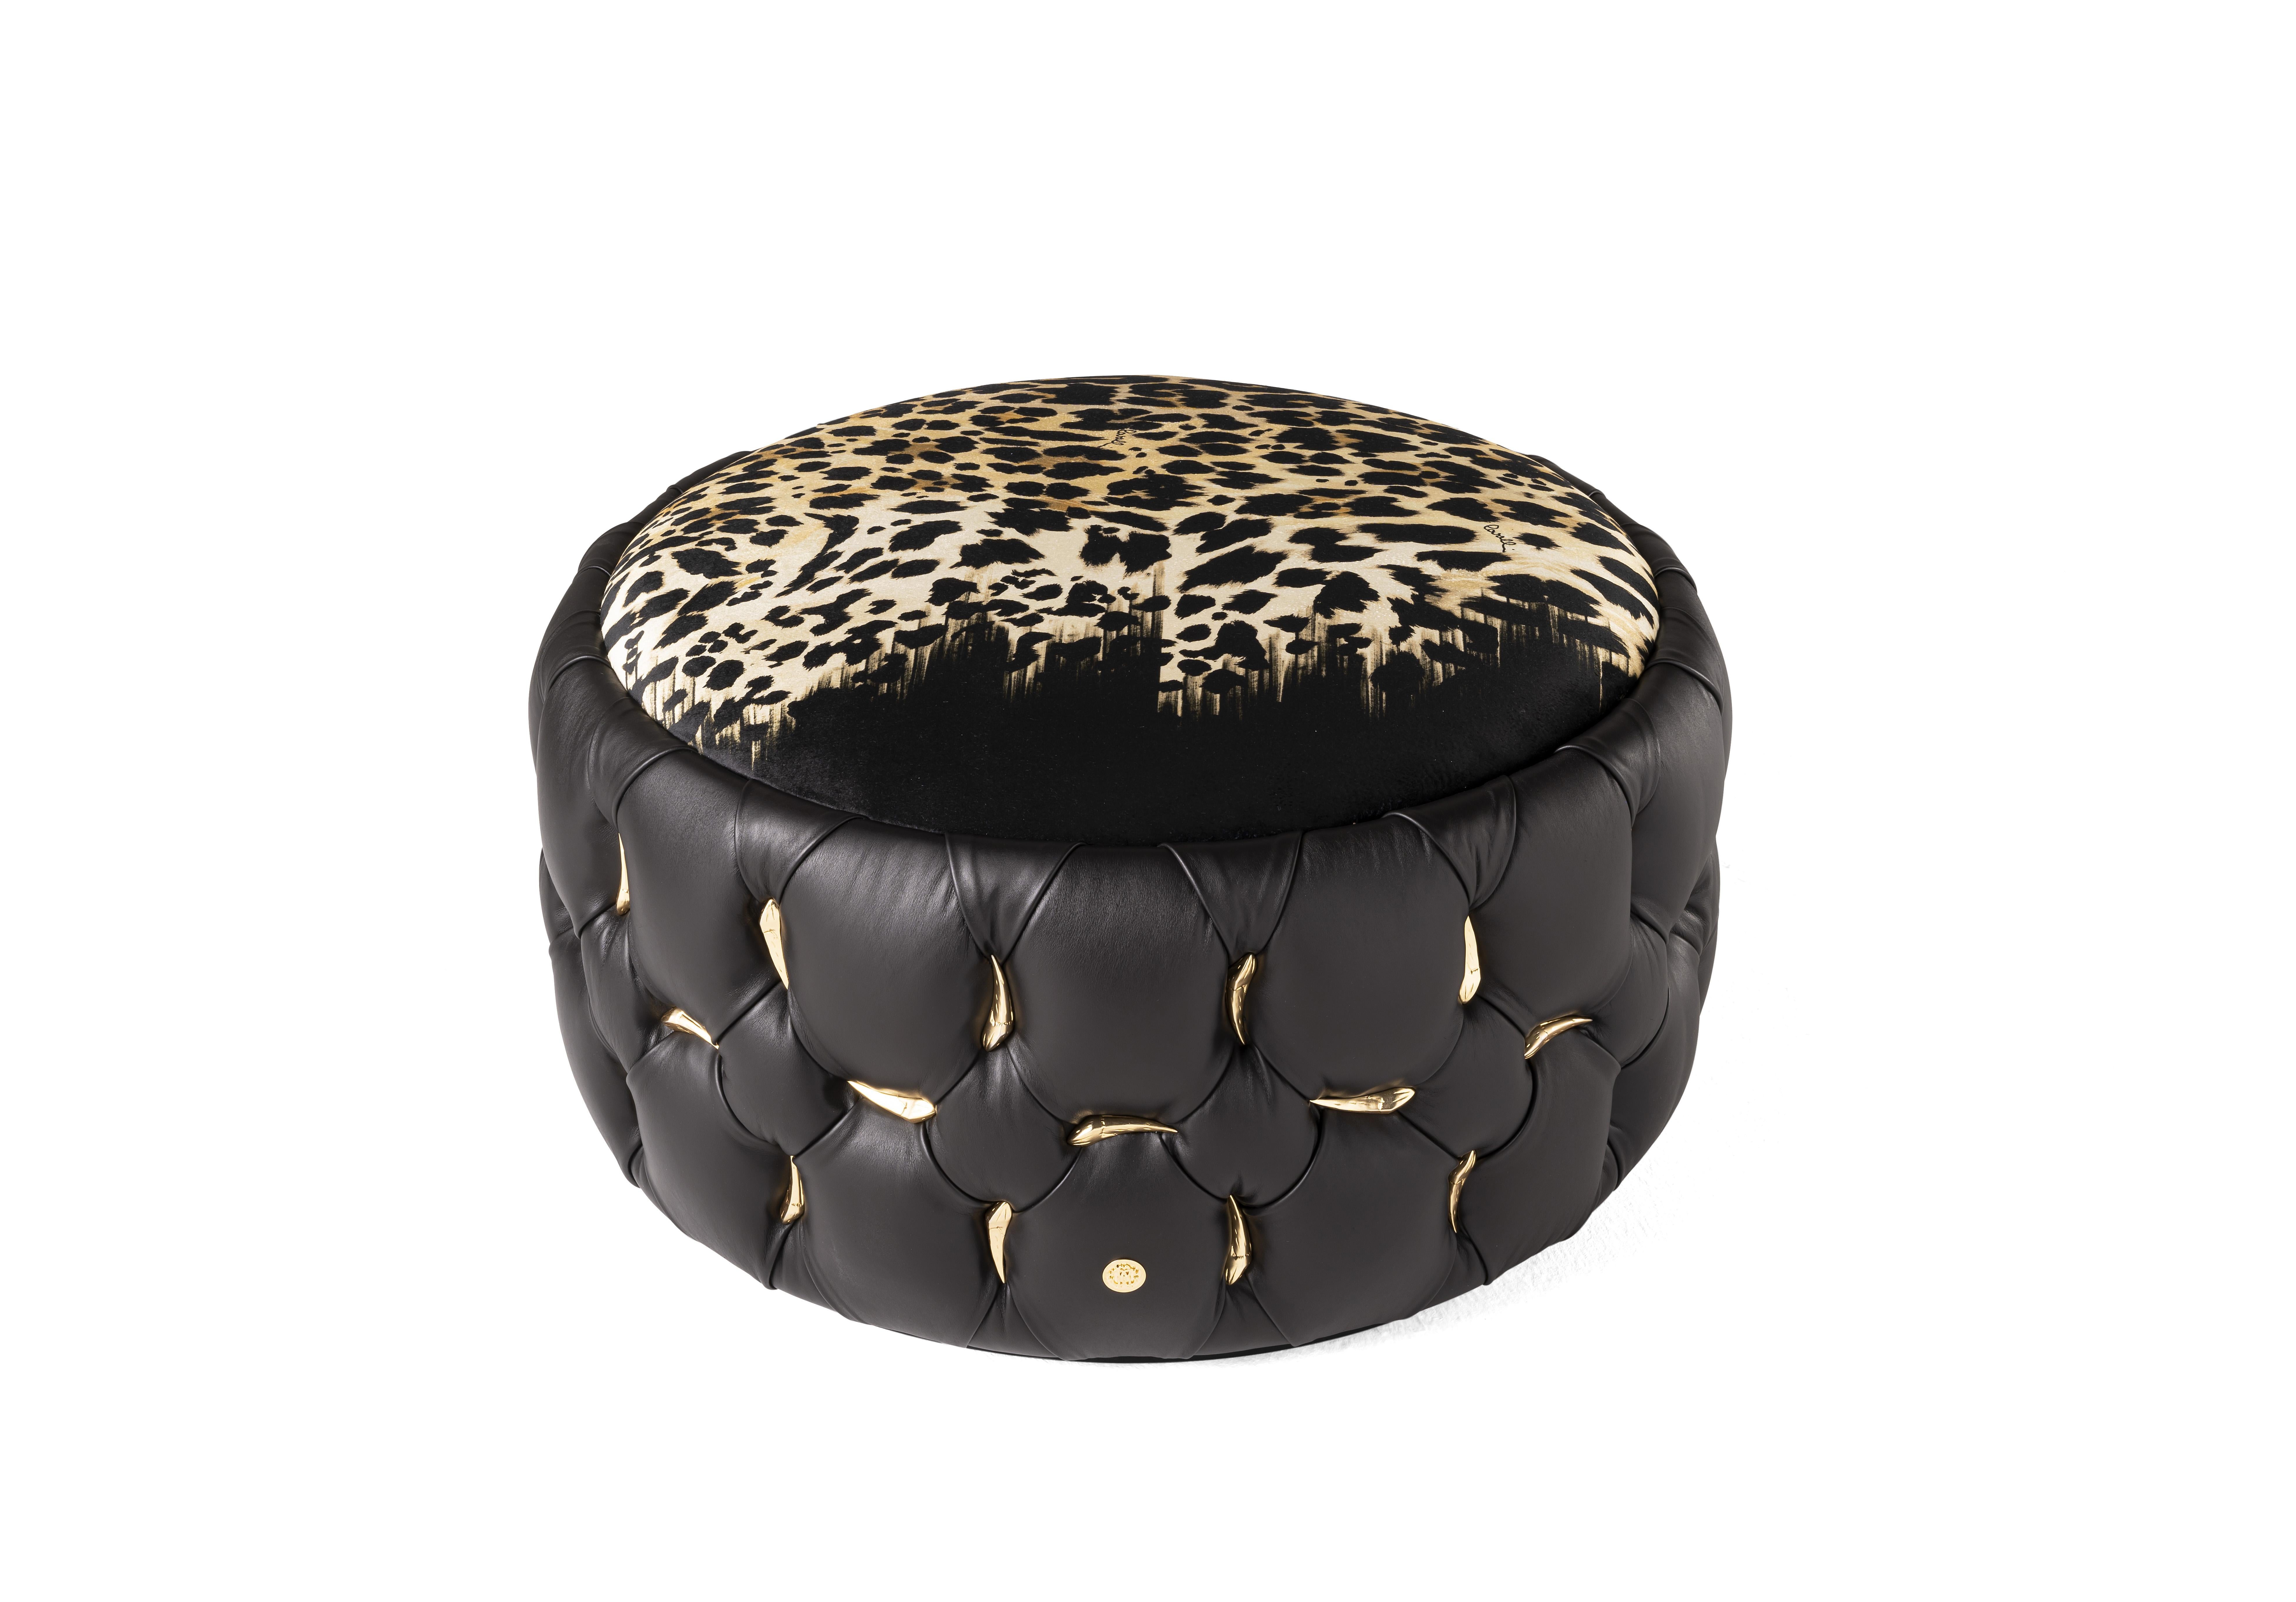 Rock spirit and glam charm for the Wild pouf. The reference to the brand's unconventional spirit can be found in the Wild Jaguar print on the velvet upholstery on the upper part, presented in this new version in an elegant neutral shade. The side